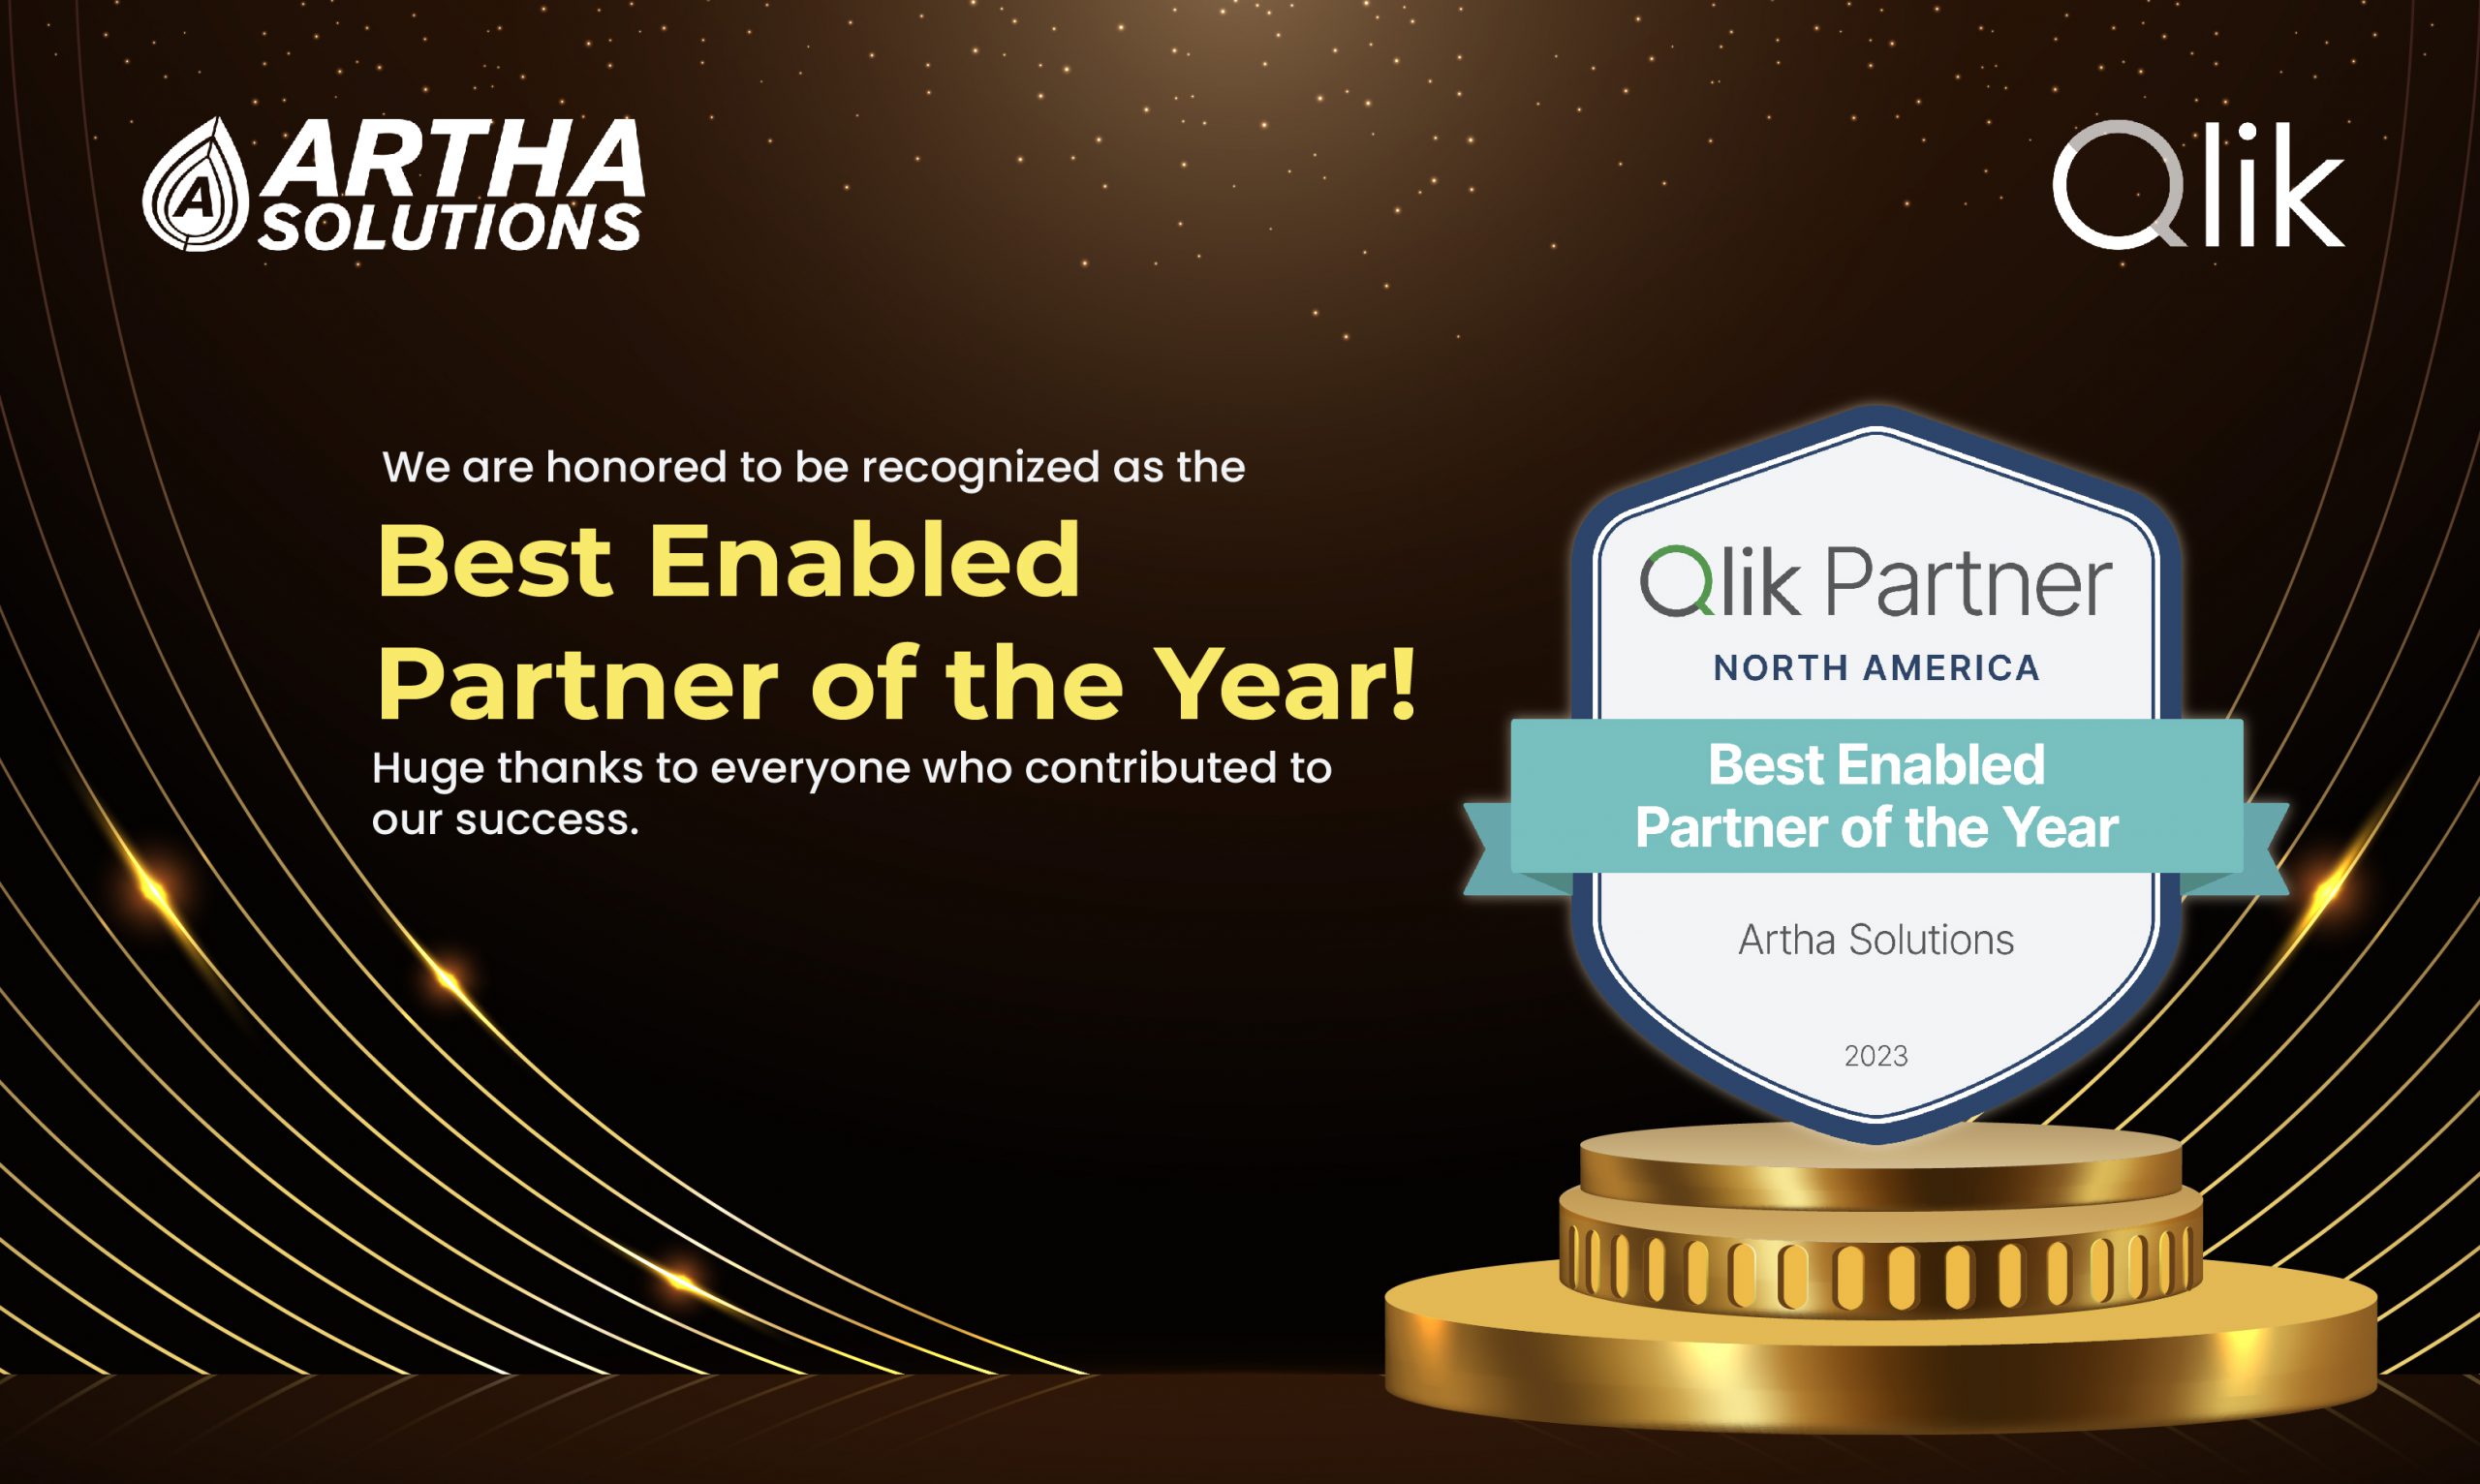 Artha Solutions Recognized as Best Enabled Partner of the Year by Qlik